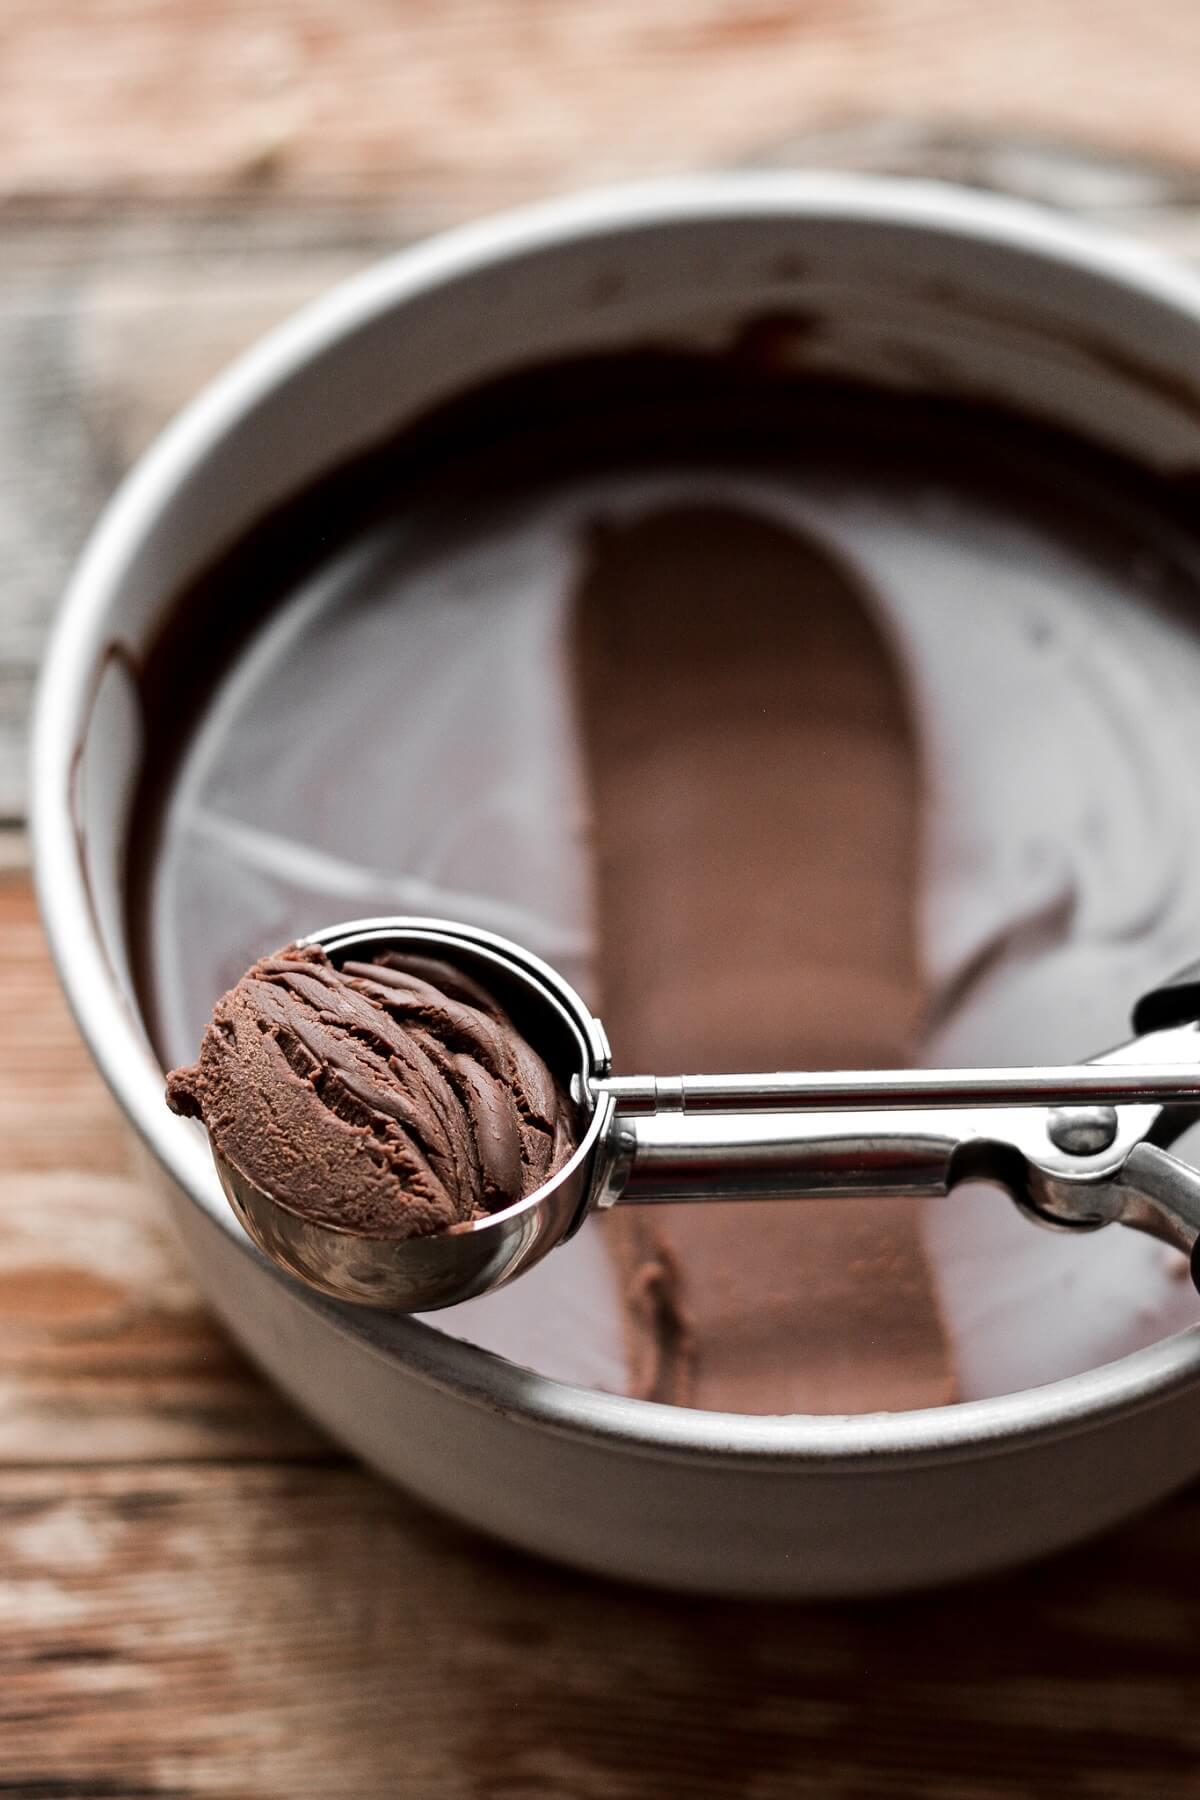 Ganache scooped with a cookie scoop.